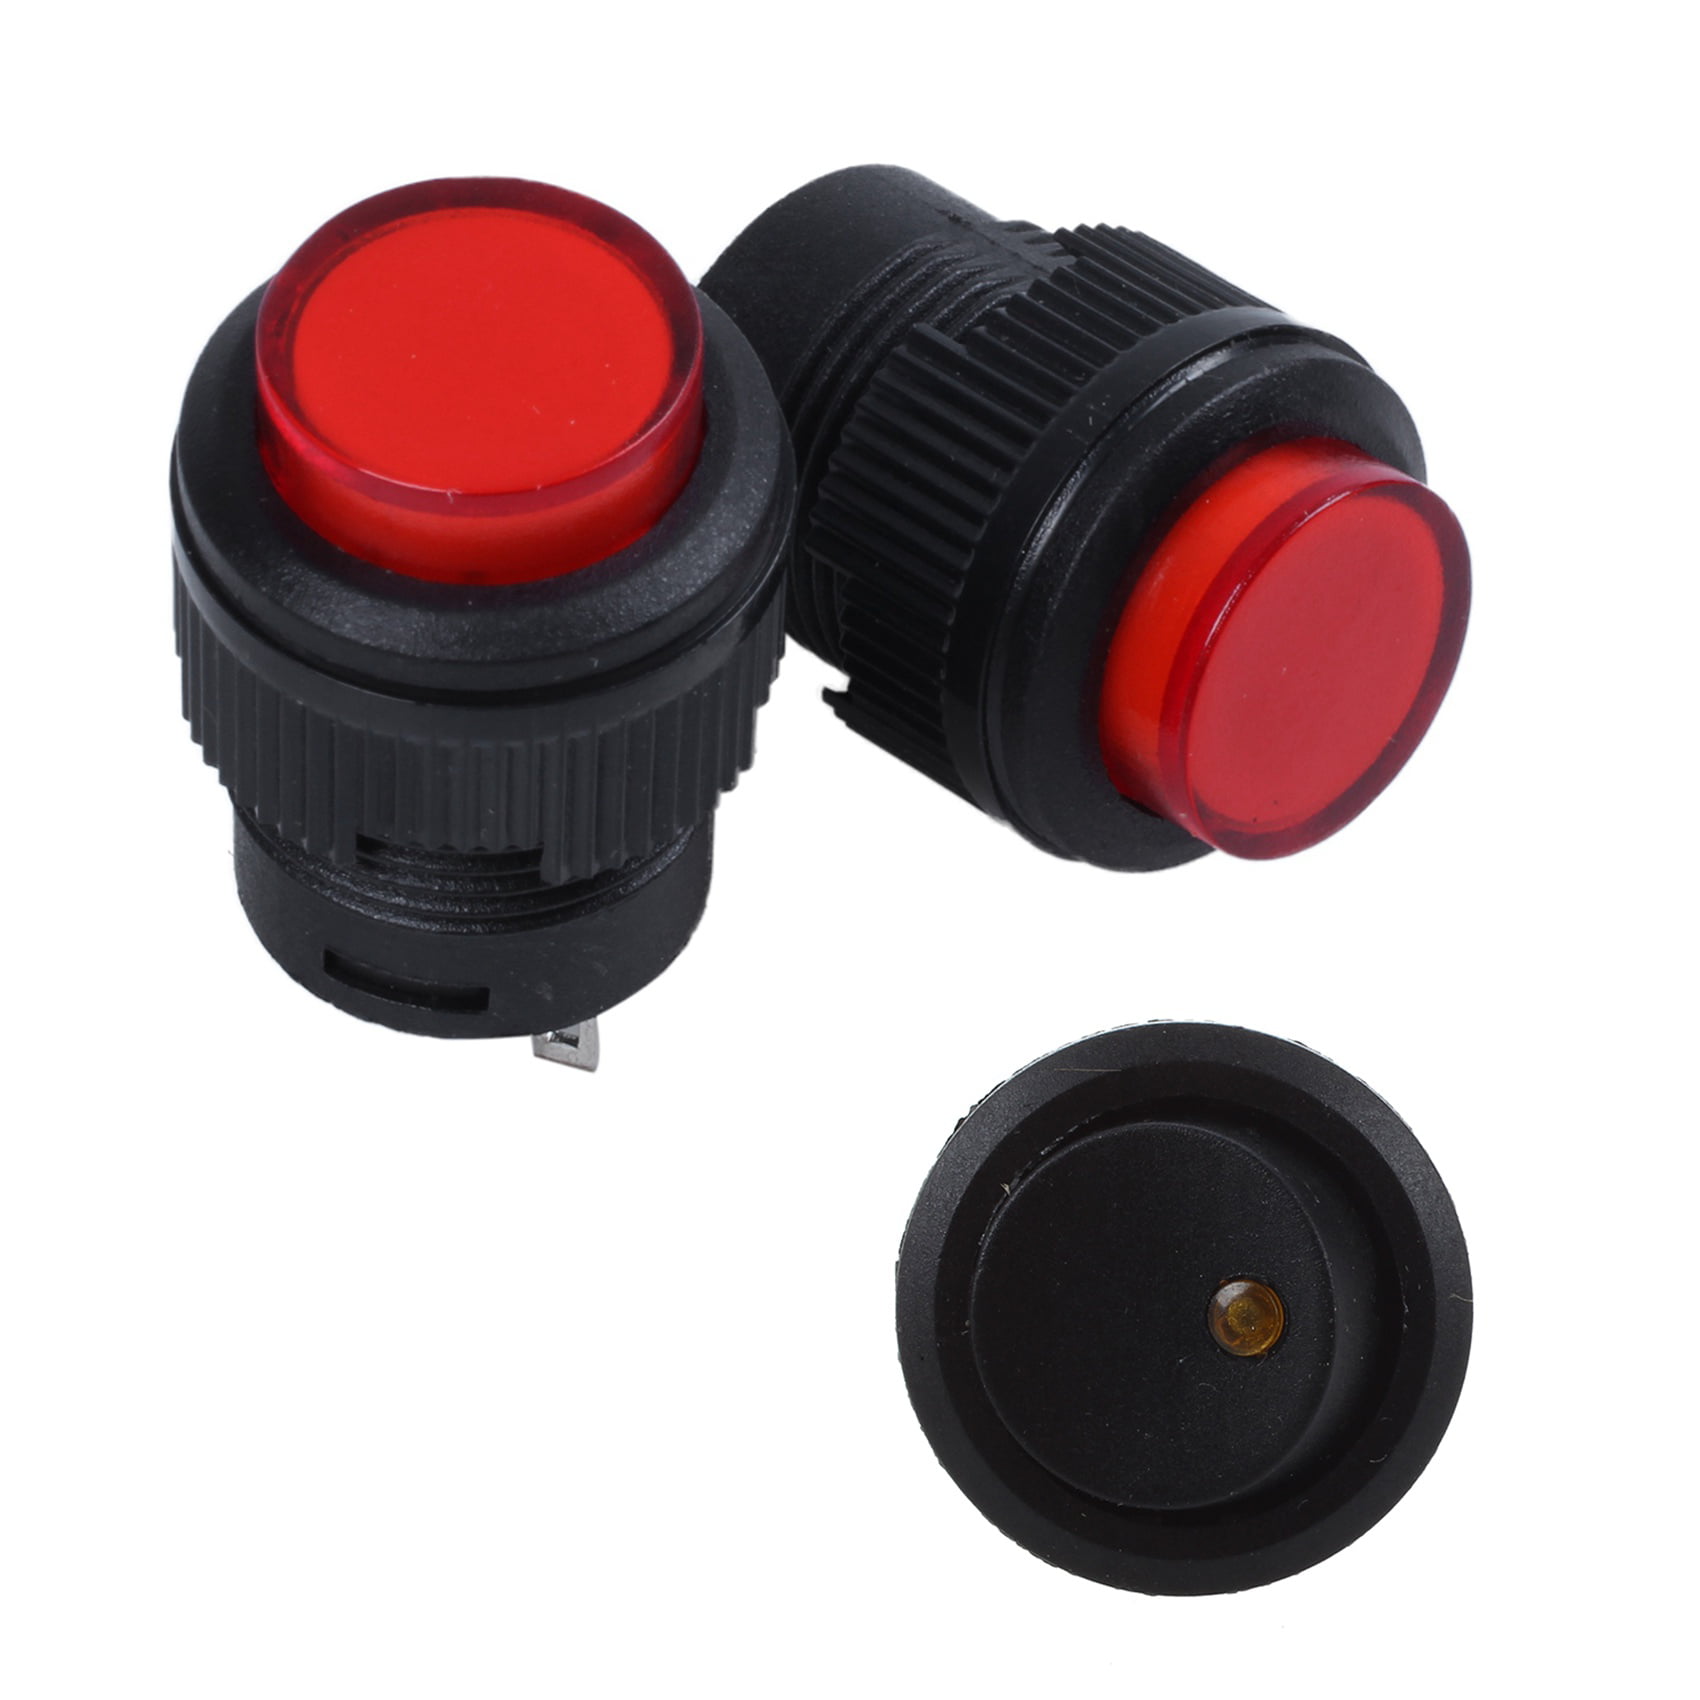 2pcs 15mm OD Waterproof Cover Cap Case for Round Push Switch Pushbutton 